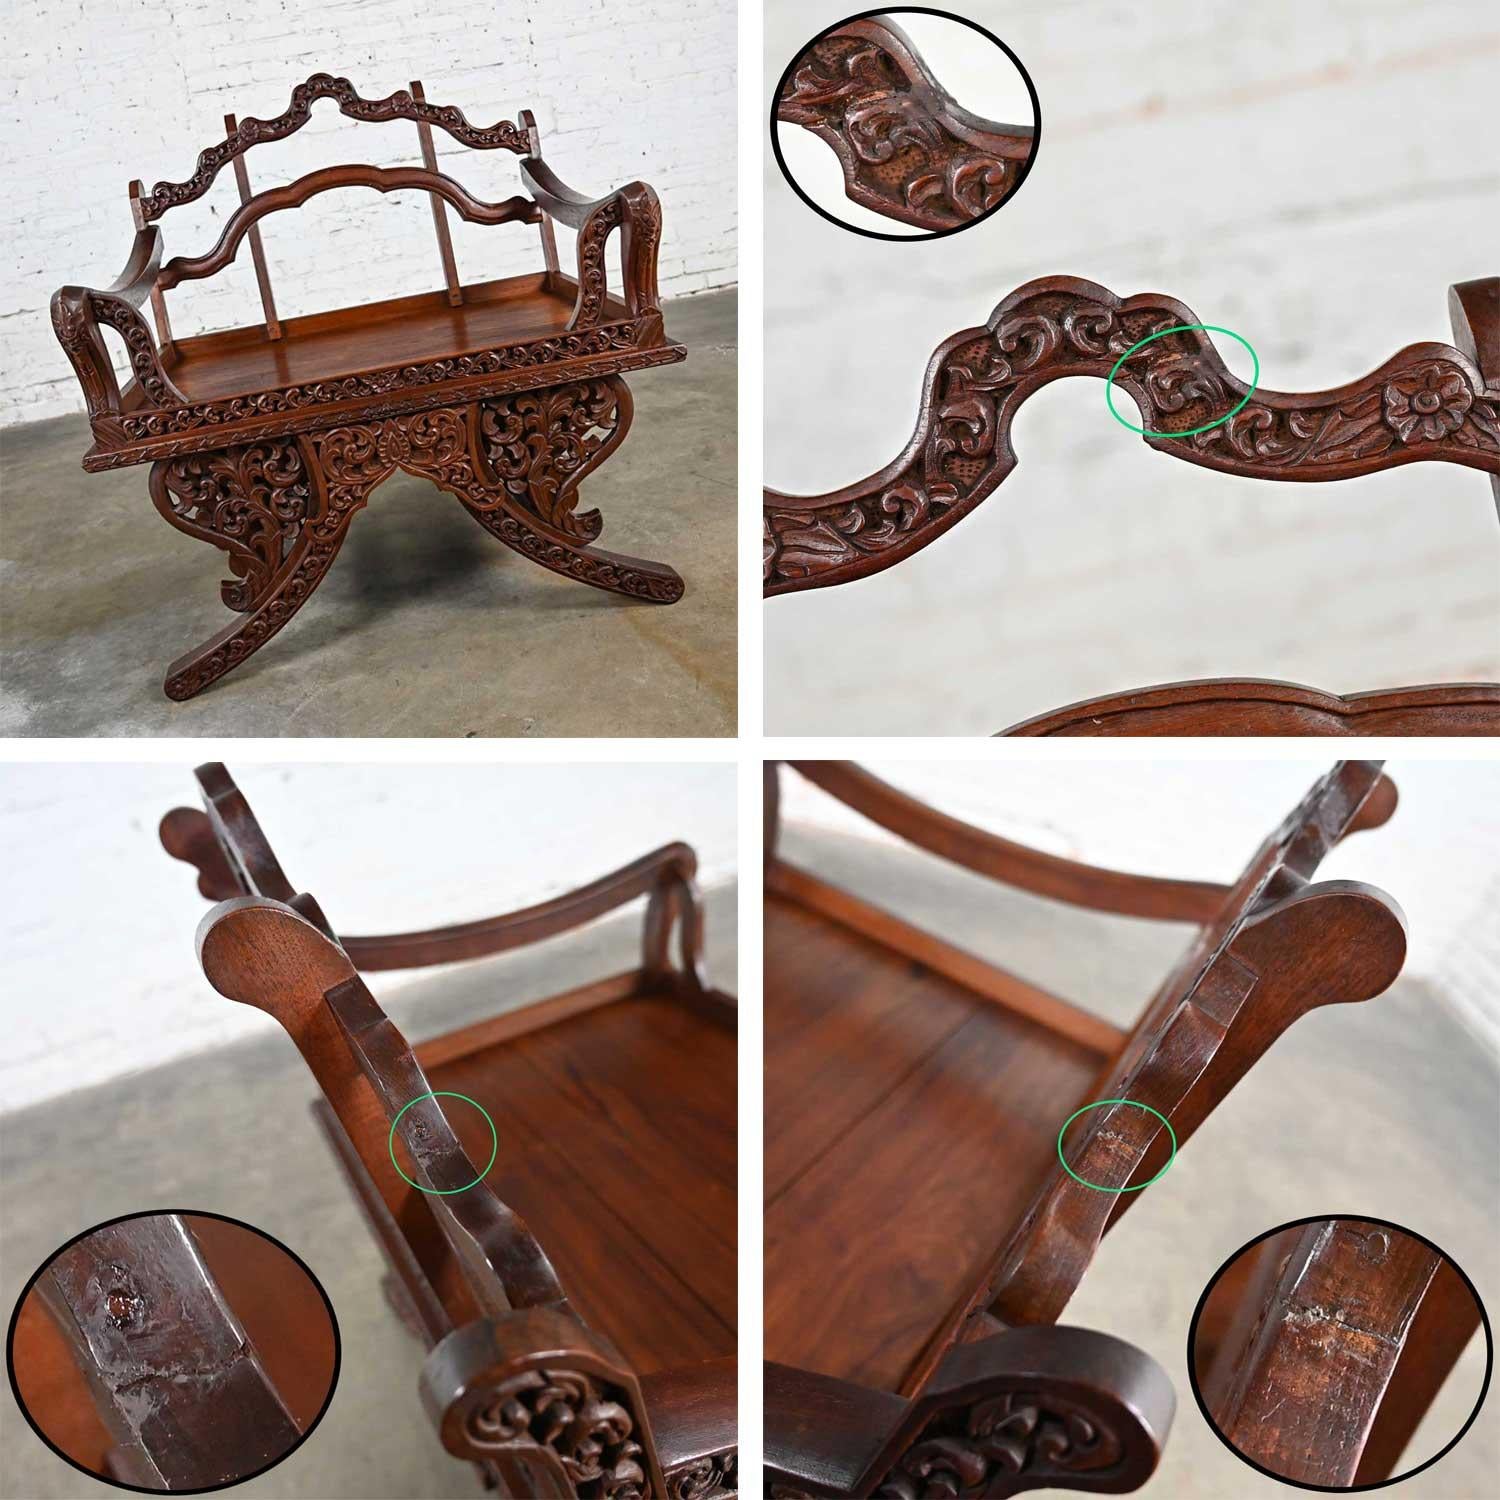 Chinoiserie Hand Carved Rosewood Howdah Elephant Saddle Chair Bangkok Thailand For Sale 7